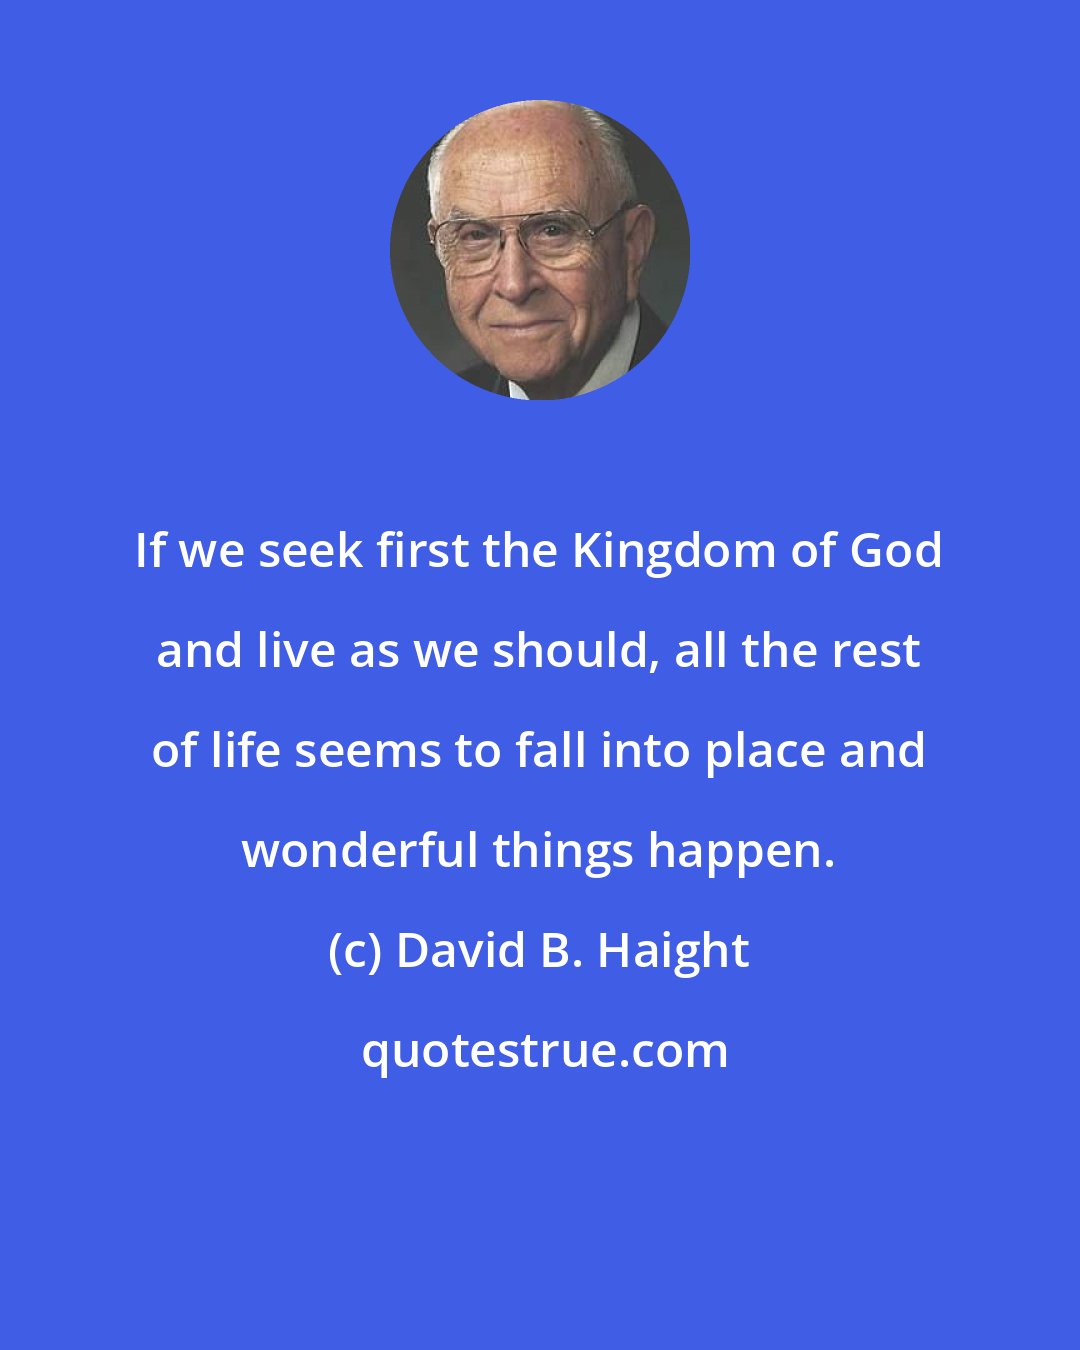 David B. Haight: If we seek first the Kingdom of God and live as we should, all the rest of life seems to fall into place and wonderful things happen.